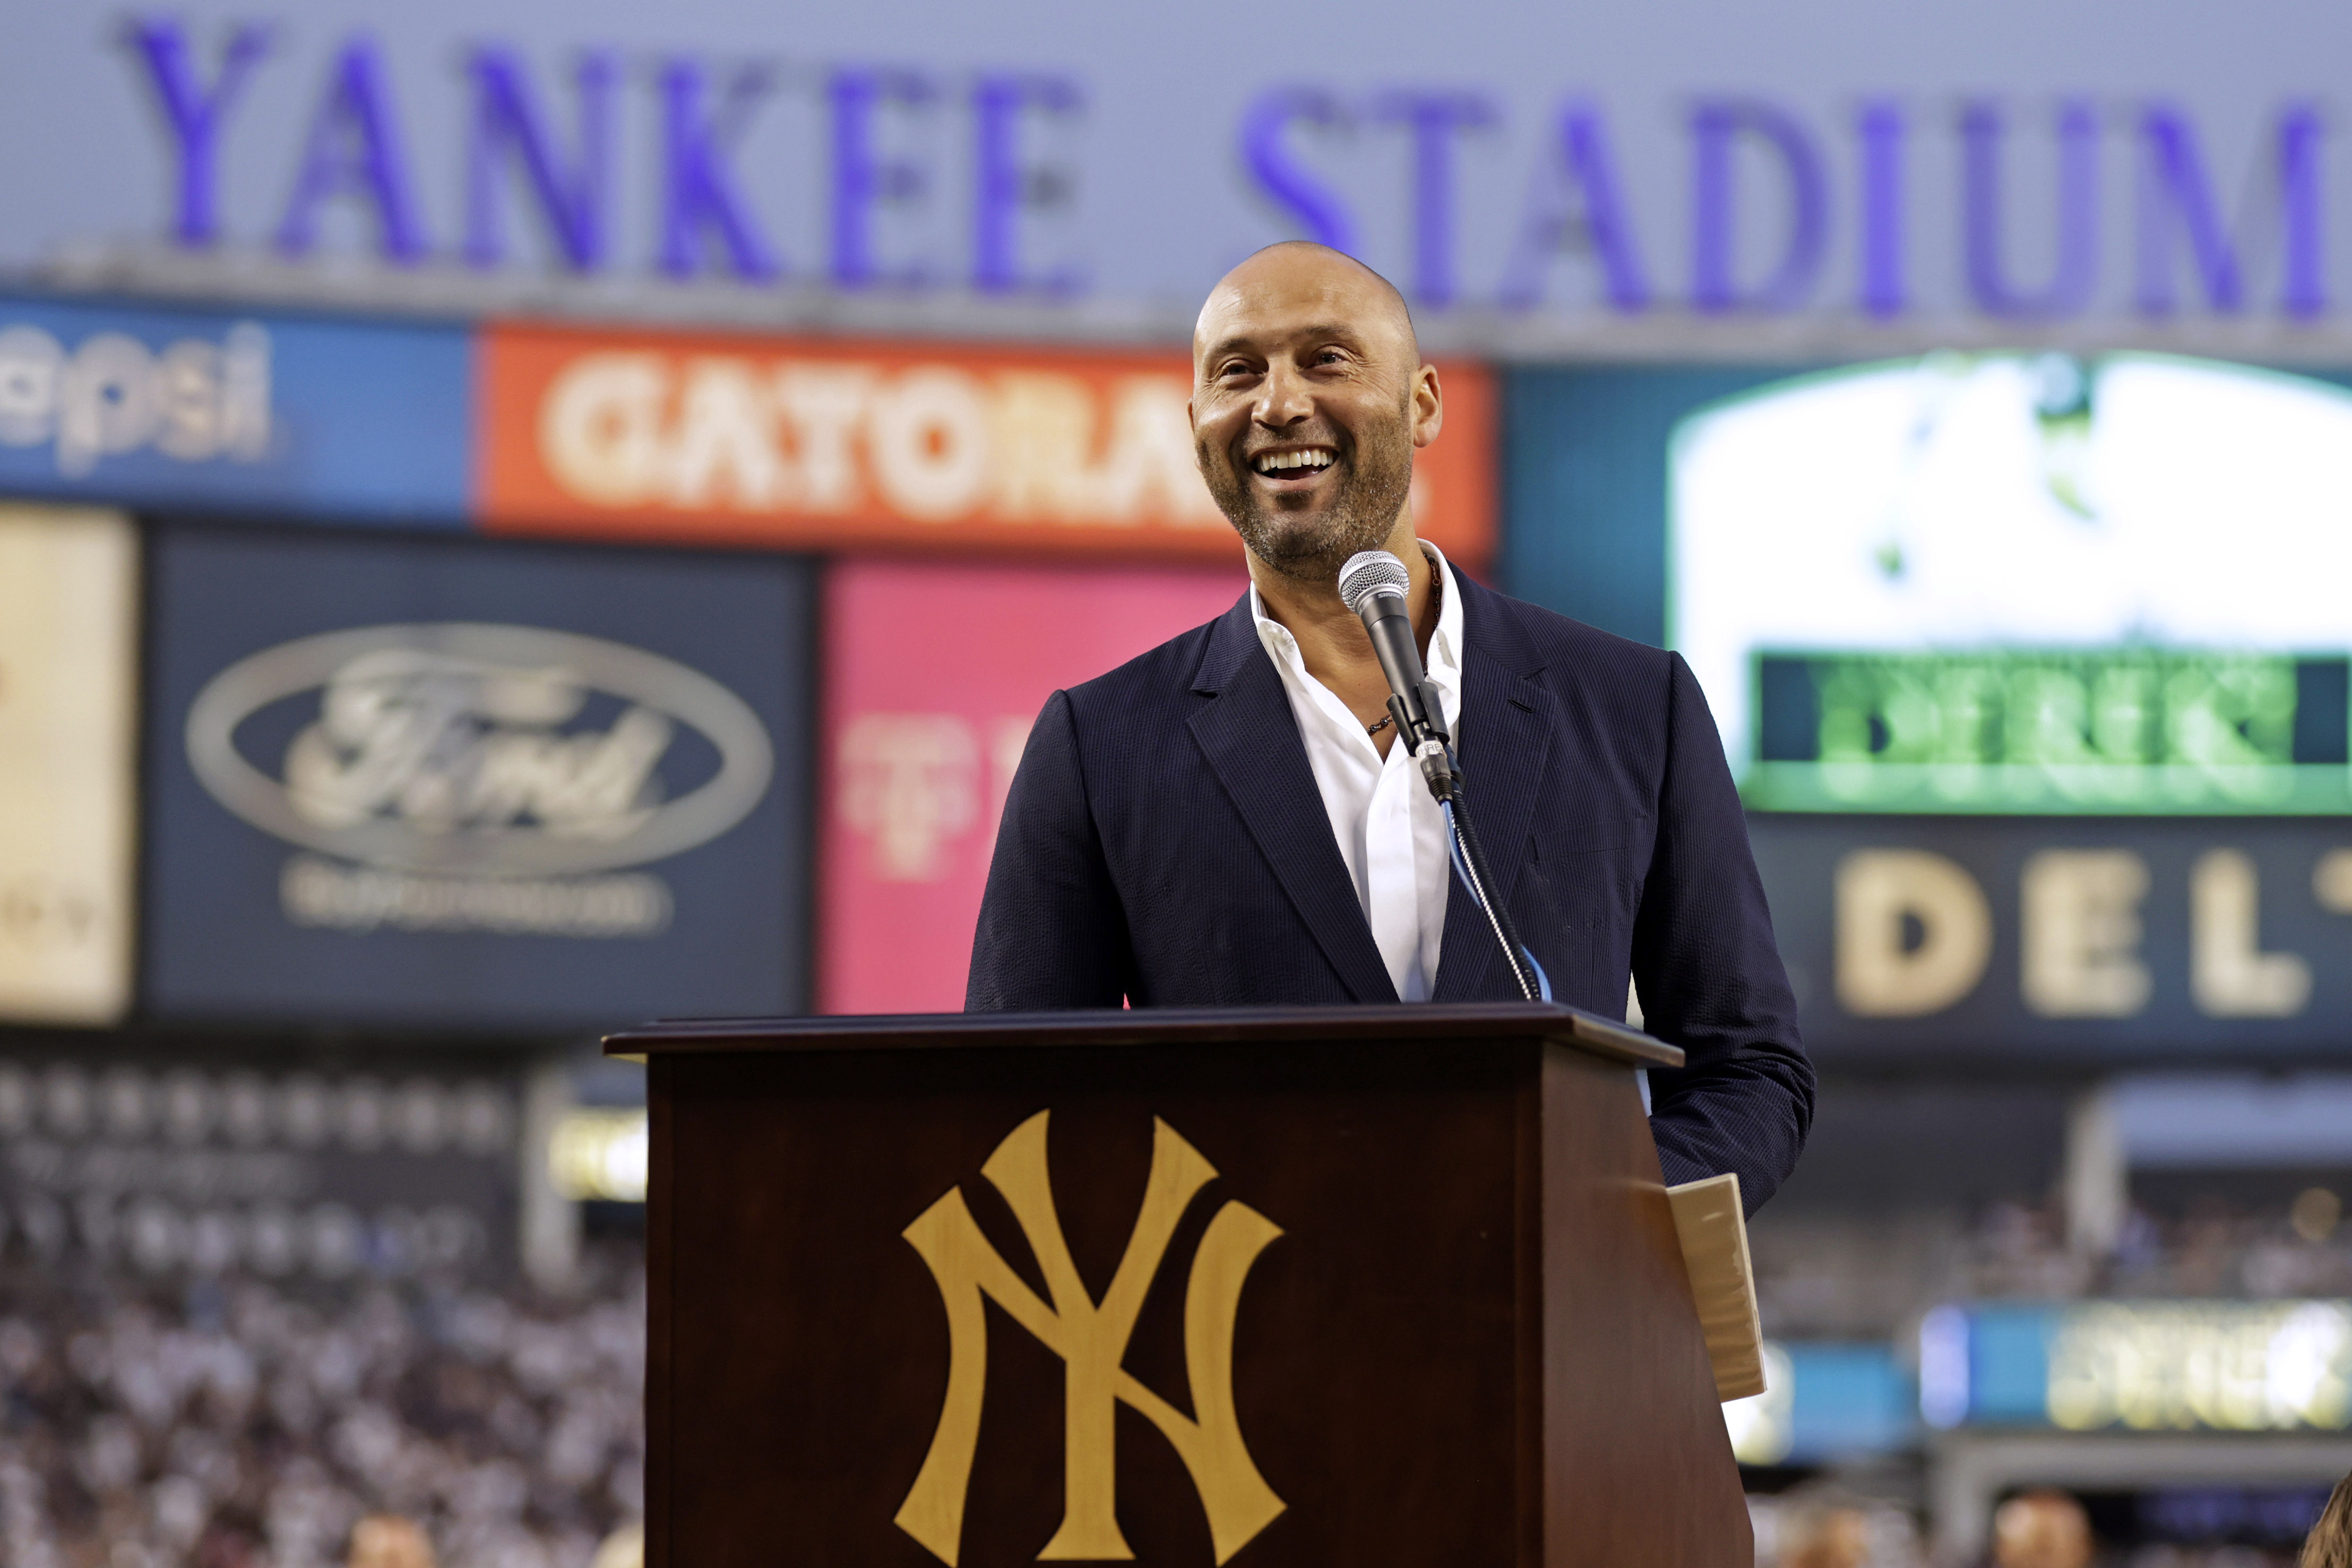 After Joe Torre Is Honored, the Yankees Gain a Win - The New York